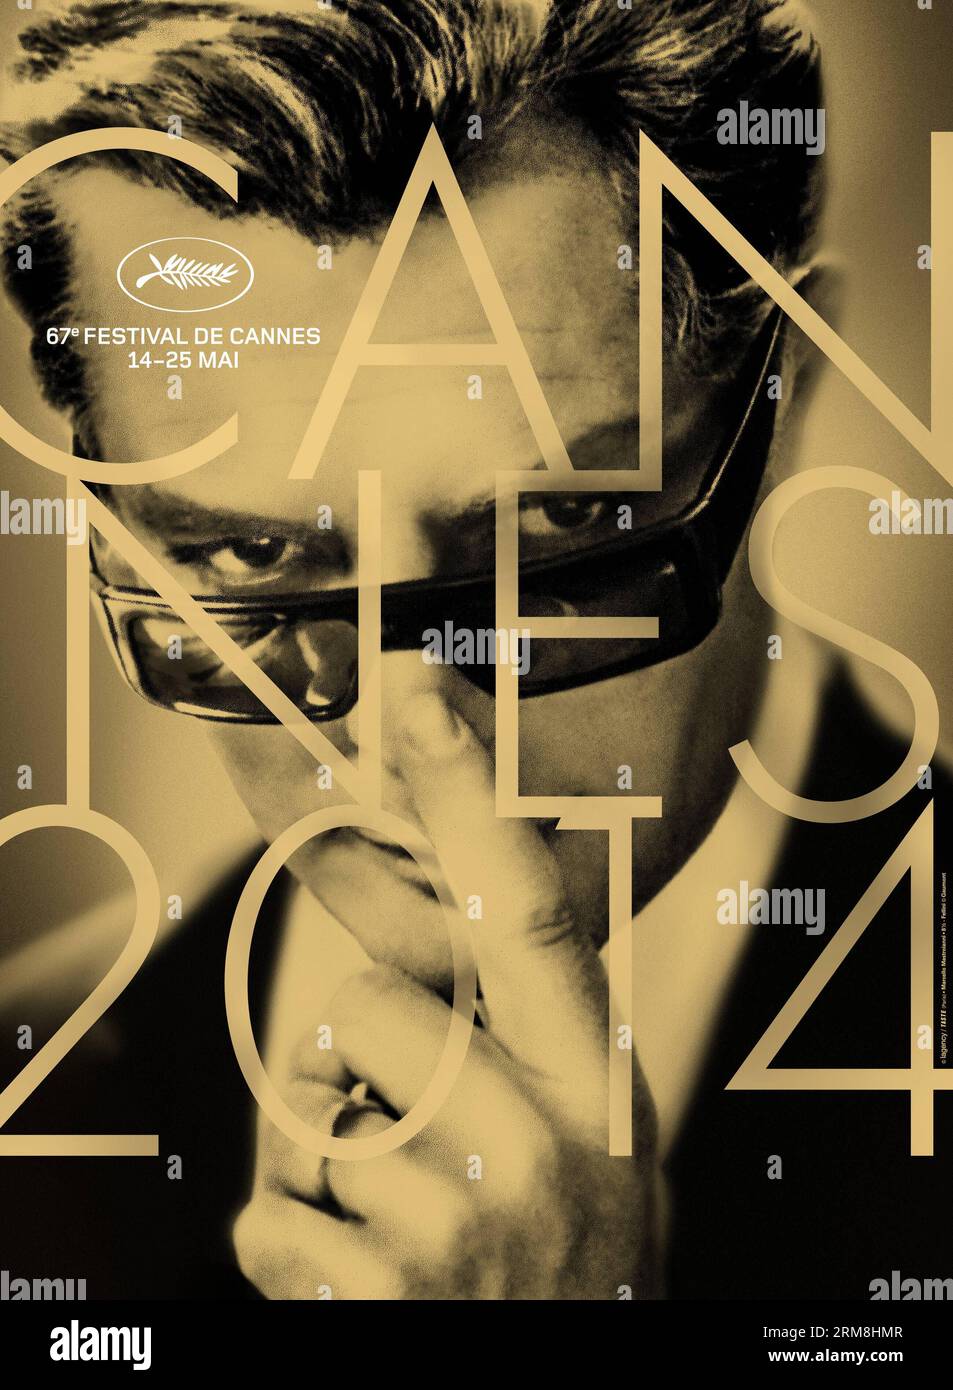 (140415) -- PARIS, April 15, 2014 (Xinhua) -- This handout picture by the Cannes film festival on April 15, 2014, shows the official poster of the 67th International Cannes film festival. The poster is designed from a picture of late Italian actor Marcello Mastroianni taken from late Italian director Federico Fellini s film 8 1/2. The 2014 Cannes film festival will be held from May 14 to 25, 2014. (Xinhua) (srb) FRANCE-ENTERTAINMENT-FILM-FESTIVAL-CANNES-POSTER PUBLICATIONxNOTxINxCHN   Paris April 15 2014 XINHUA This handout Picture by The Cannes Film Festival ON April 15 2014 Shows The Officia Stock Photo